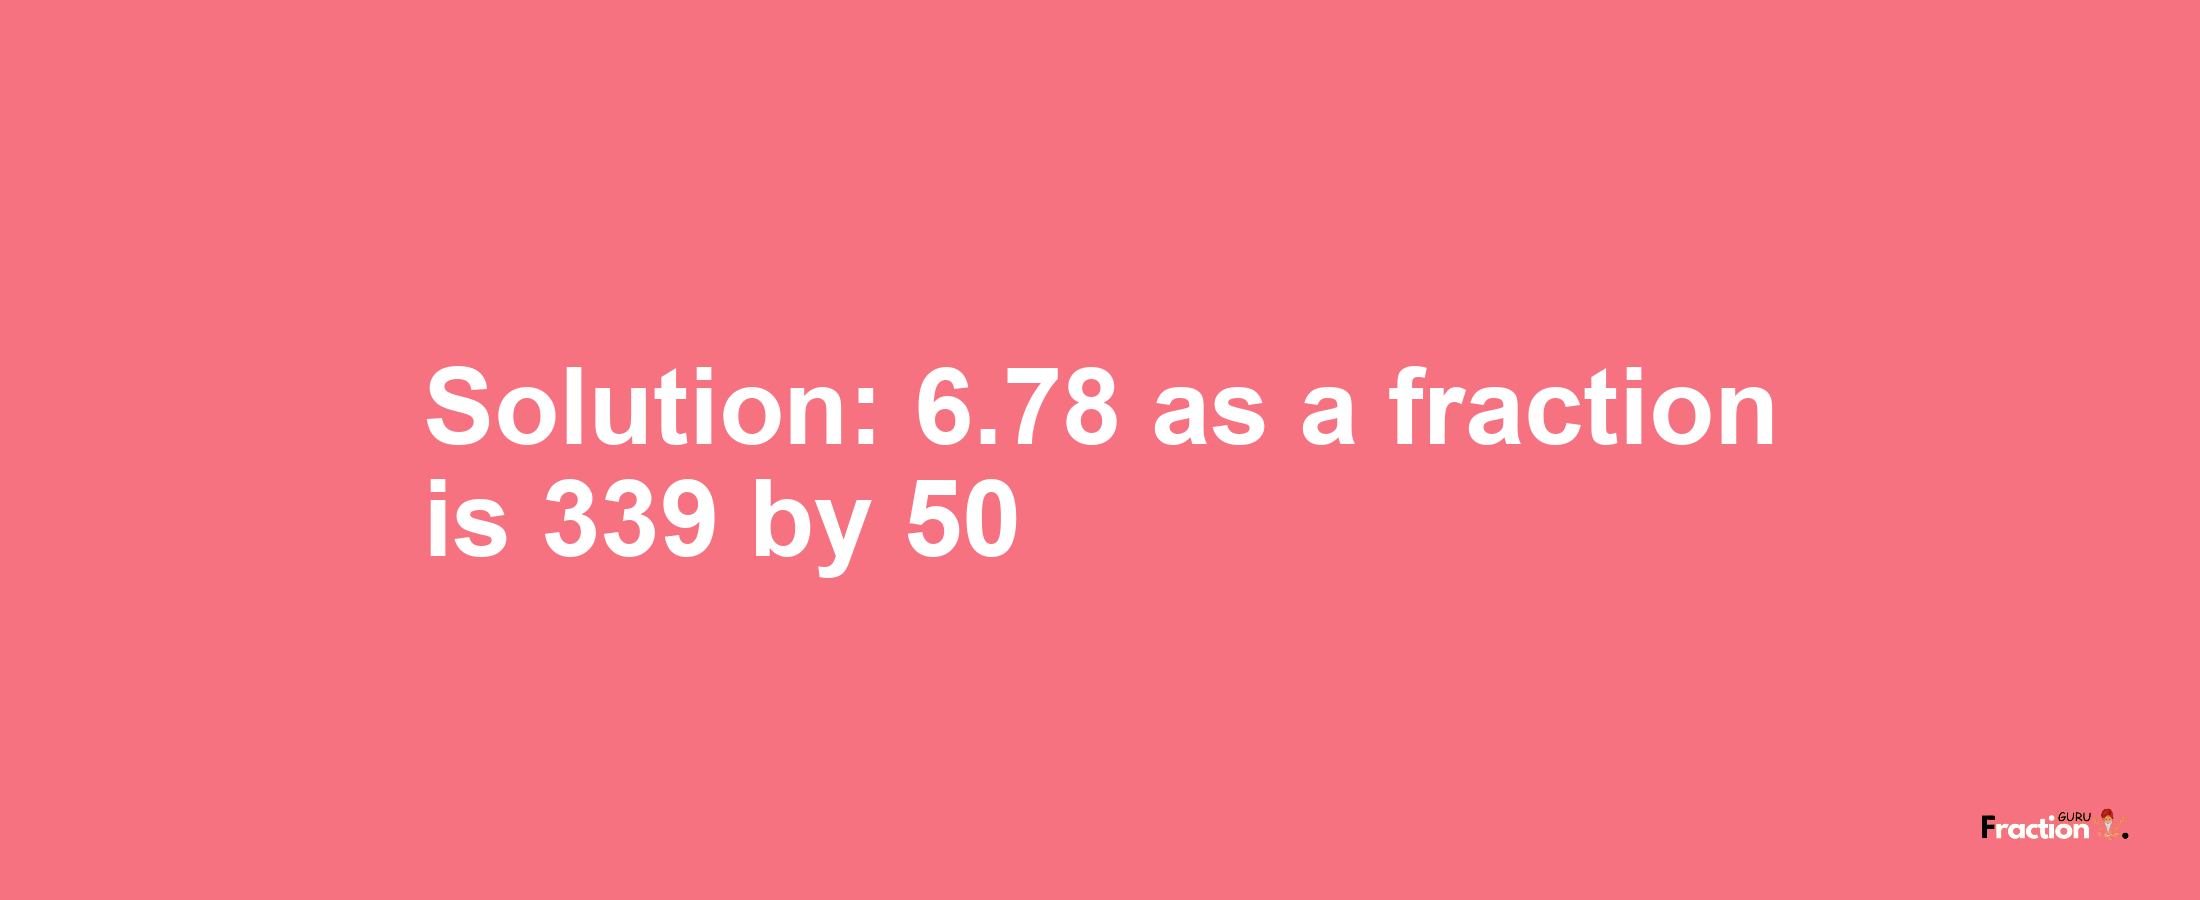 Solution:6.78 as a fraction is 339/50